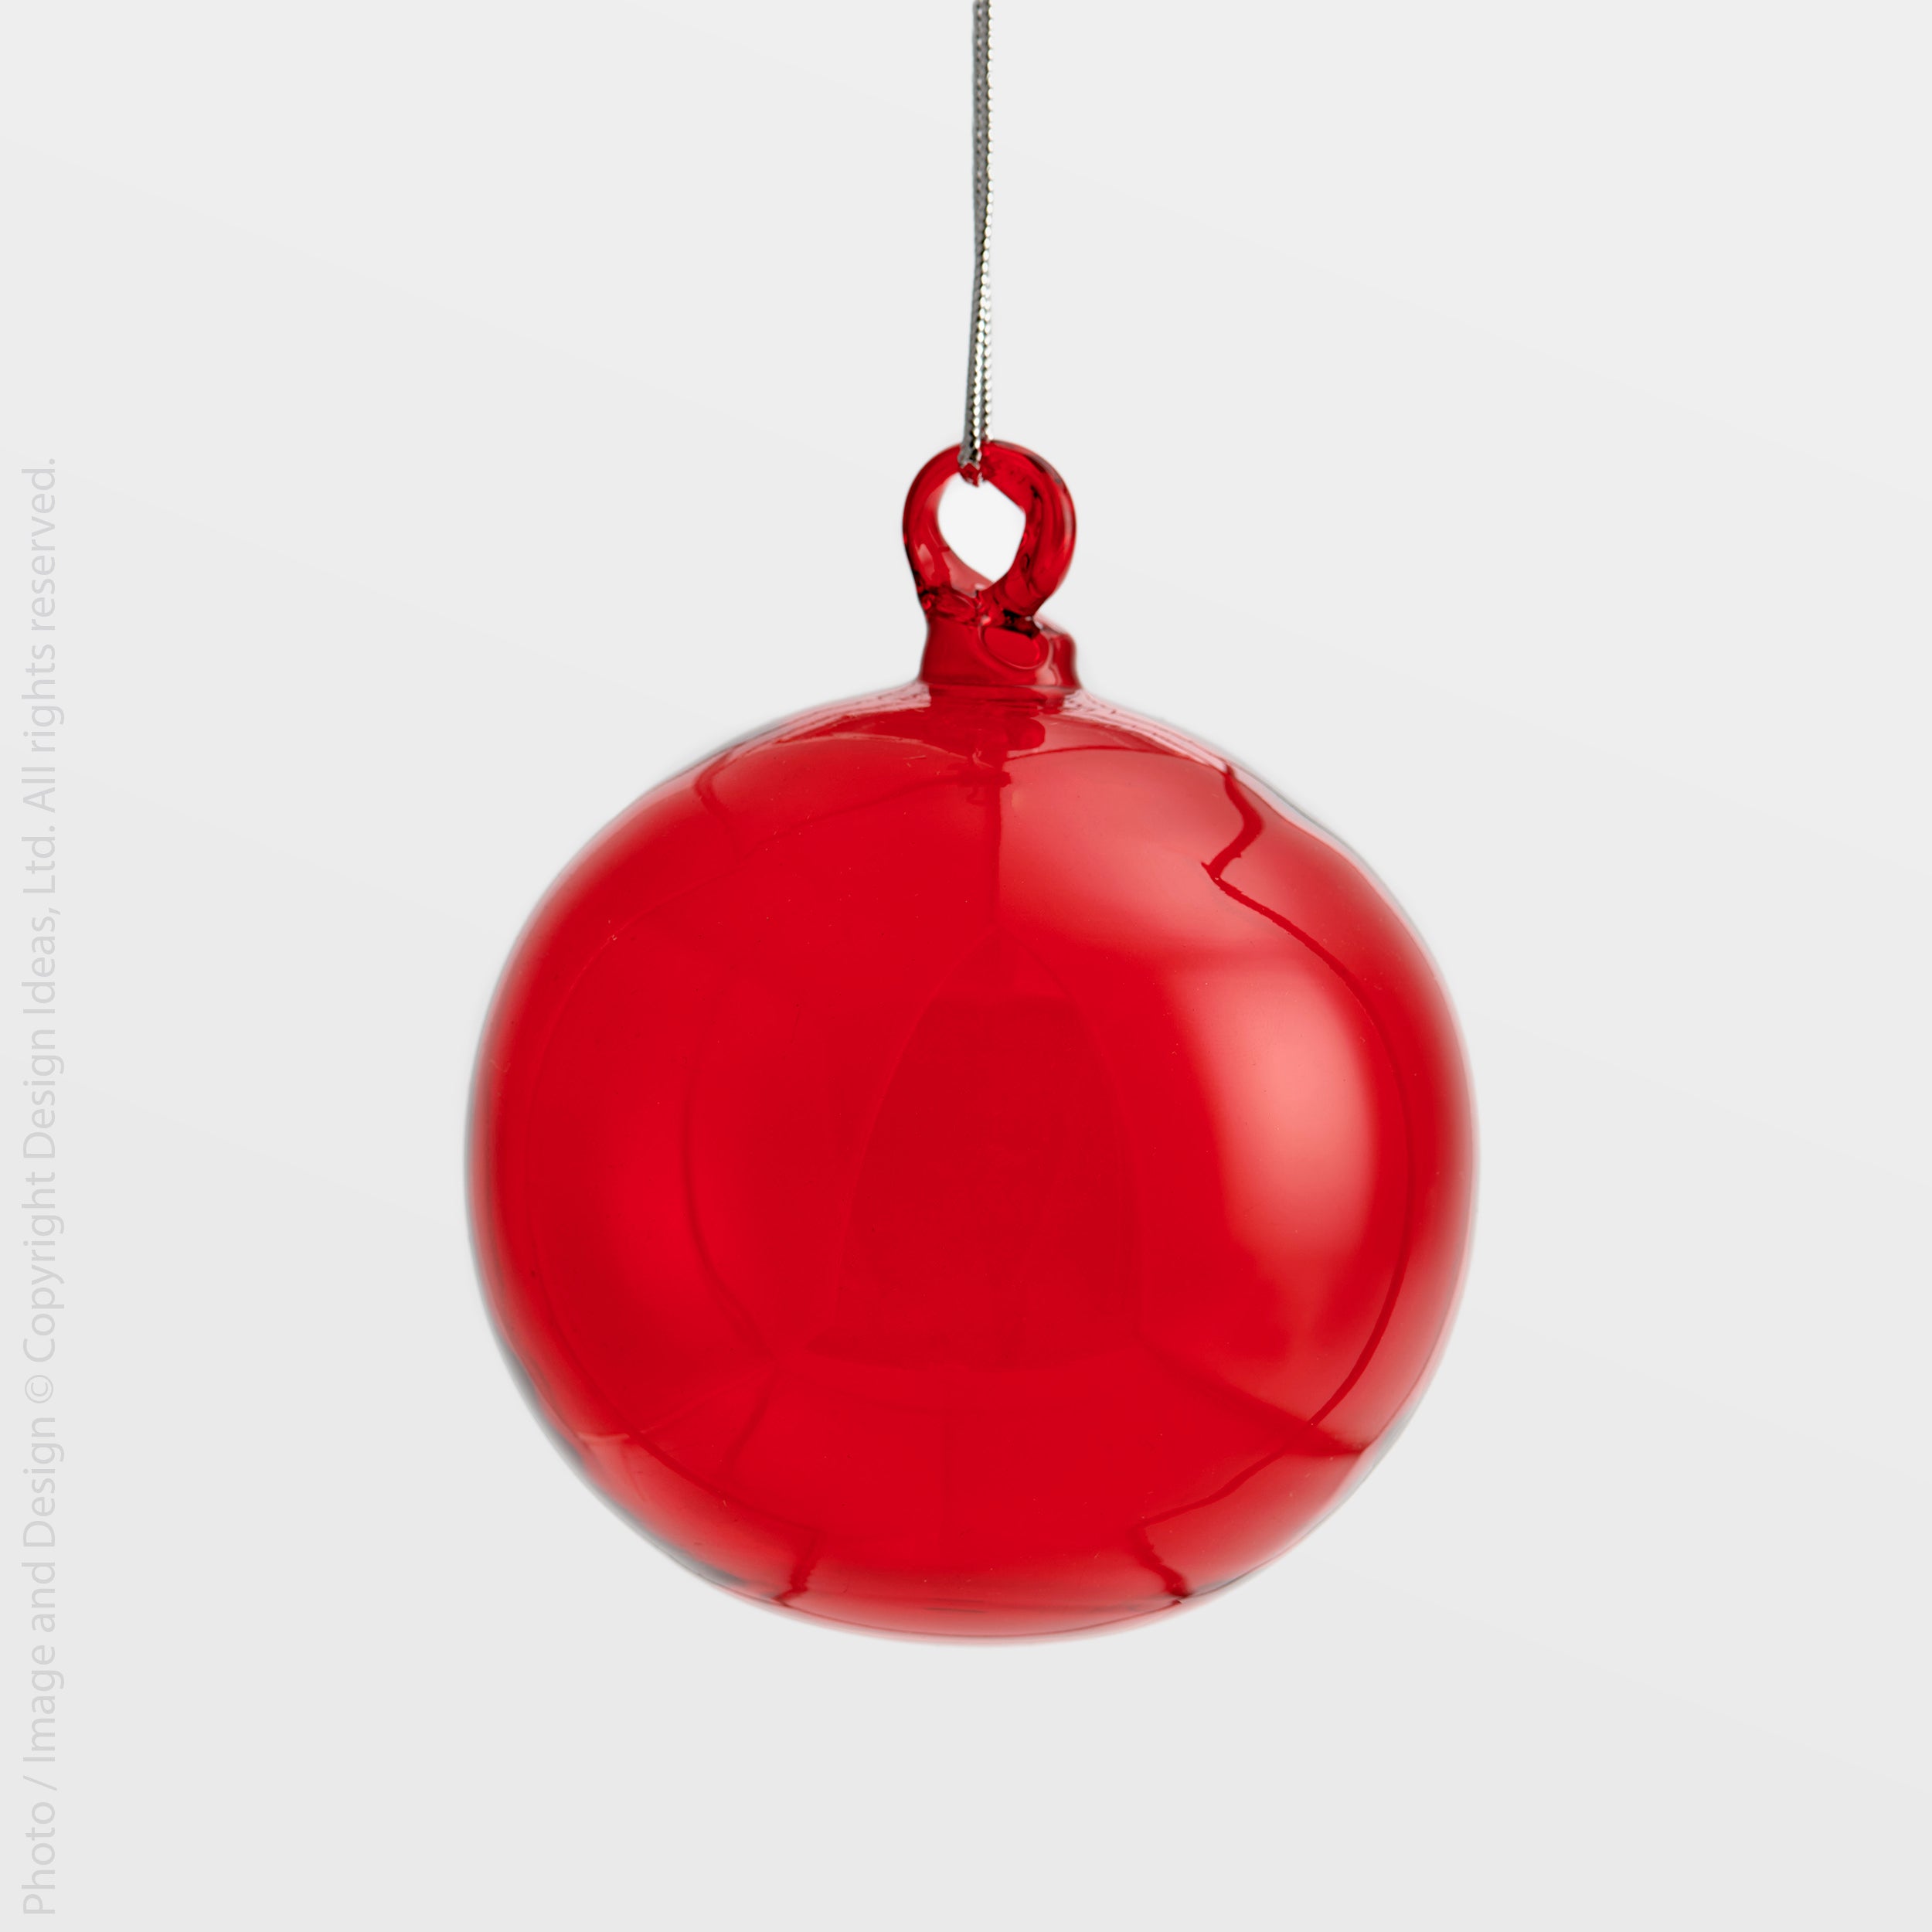 Moroah™ Mouth Blown Glass ornament (4 in.)